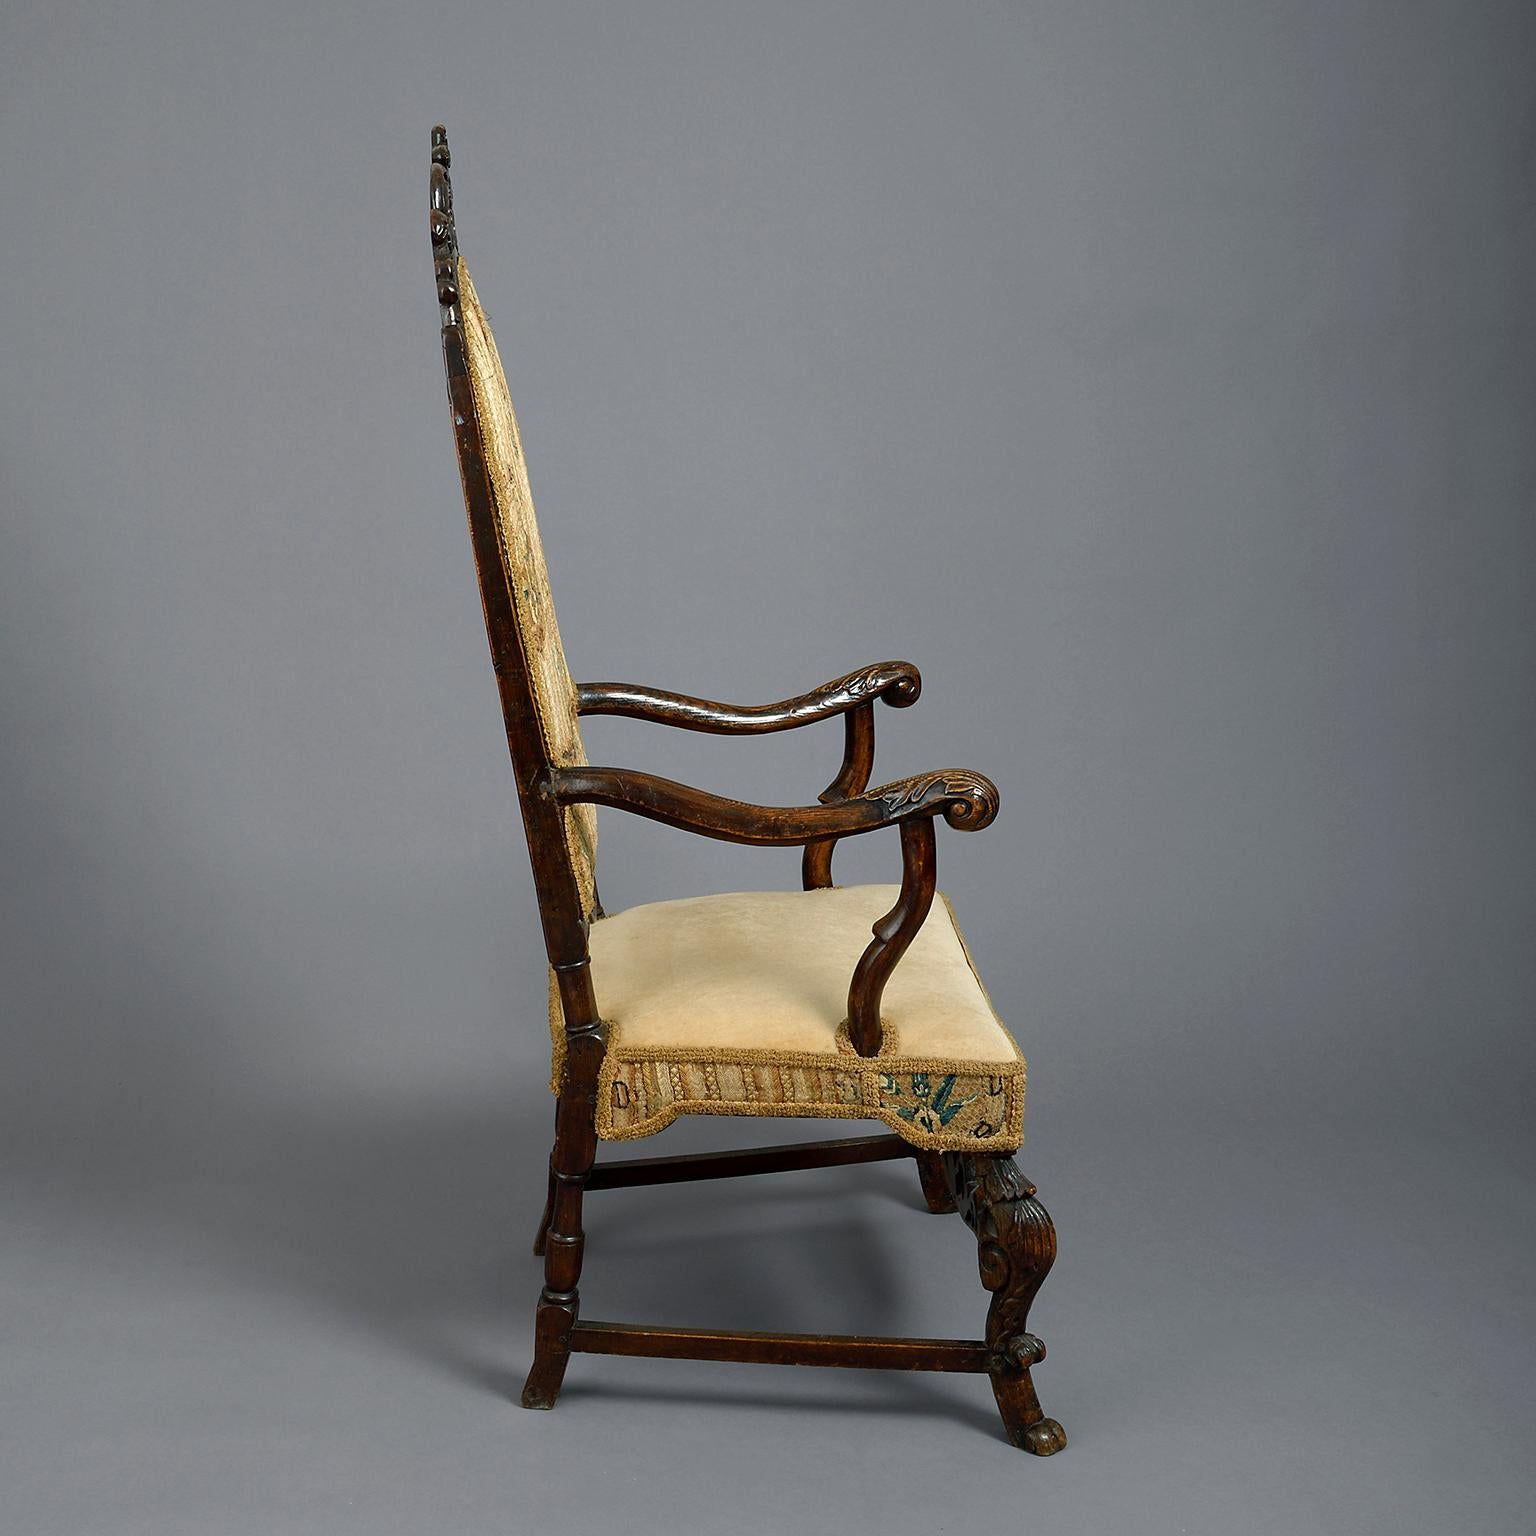 A 17th century Dutch armchair, the tall upholstered back with lambrequin and scroll cresting, with out-curved arms, stuffed seat and cabriole legs joined by a similarly carved stretcher; restored and partly upholstered in associated Italian 17th